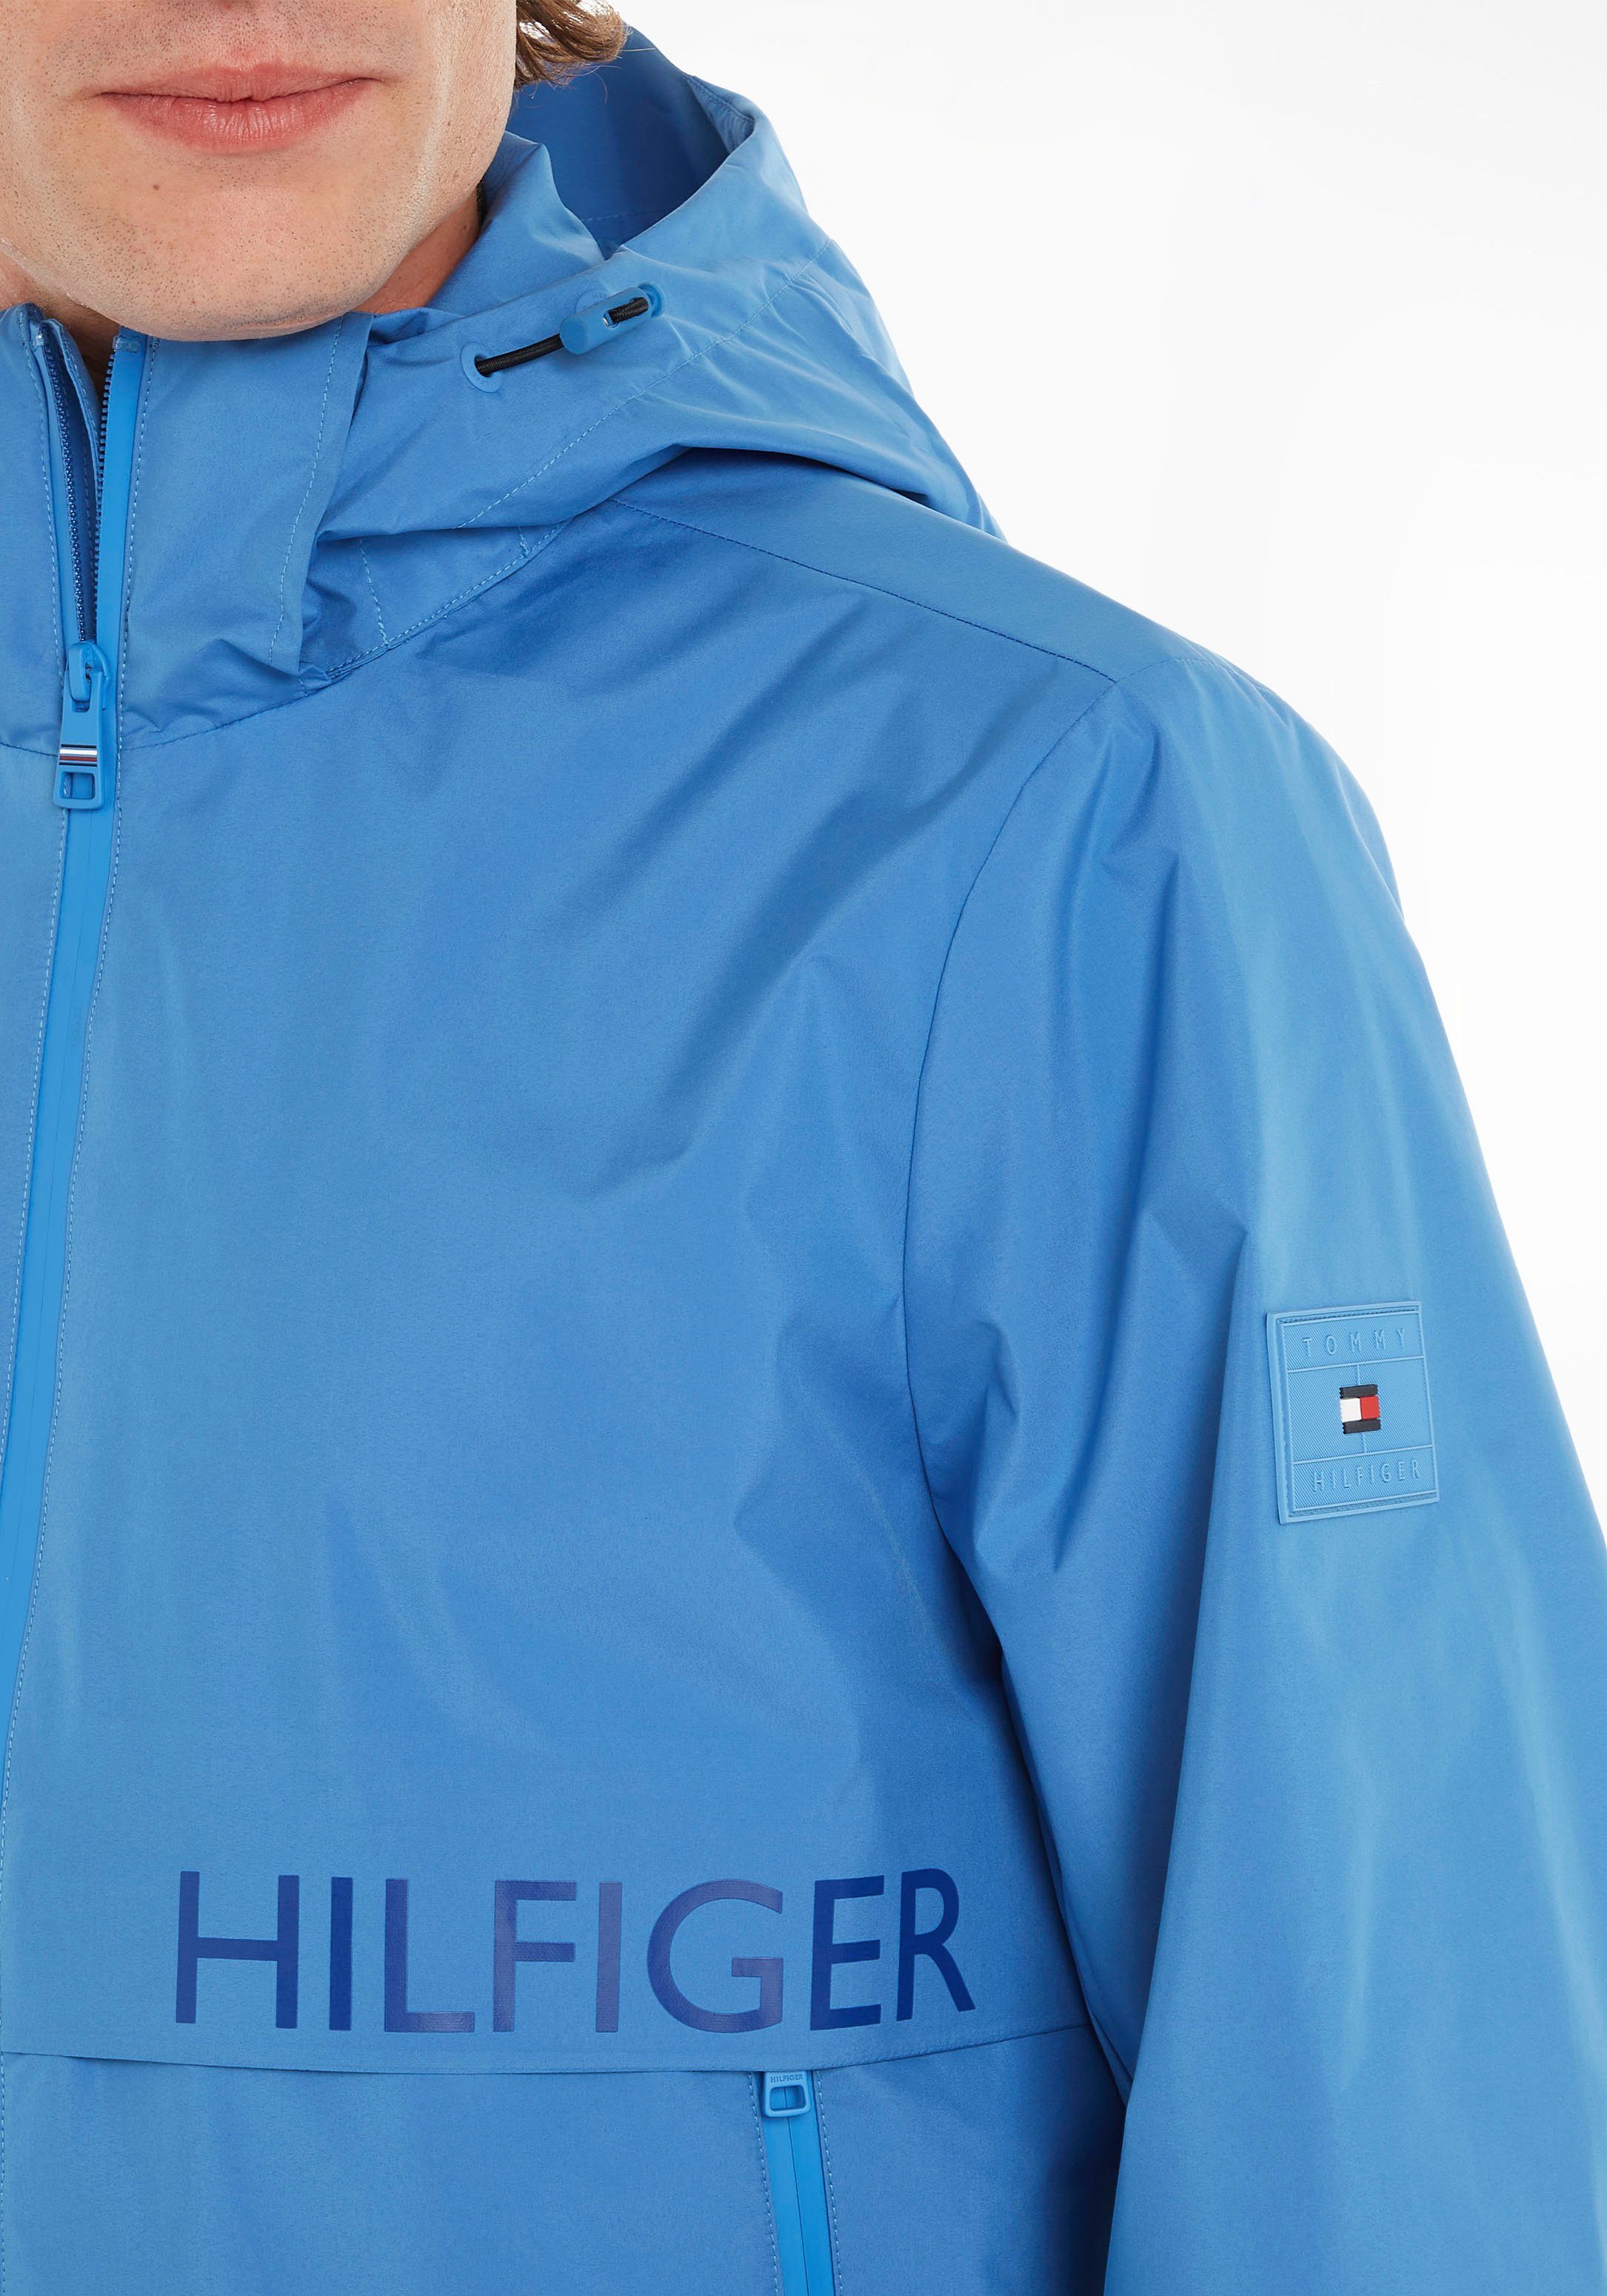 JACKET Hilfiger PROTECT Blue TH Funktionsjacke Tommy Iconic SAIL HOODED